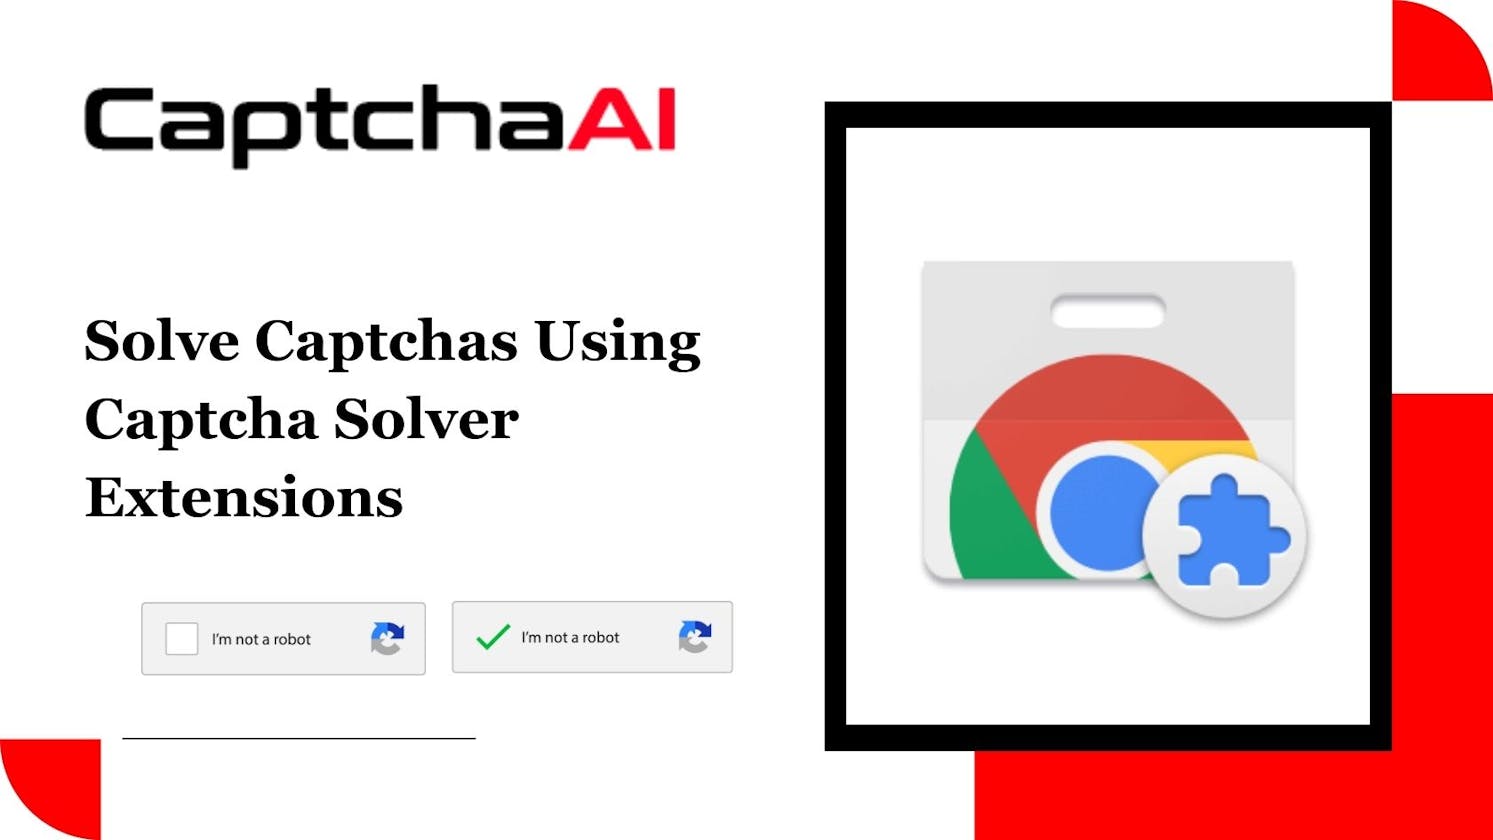 How To Solve Captchas Using Captcha Solver Extensions?